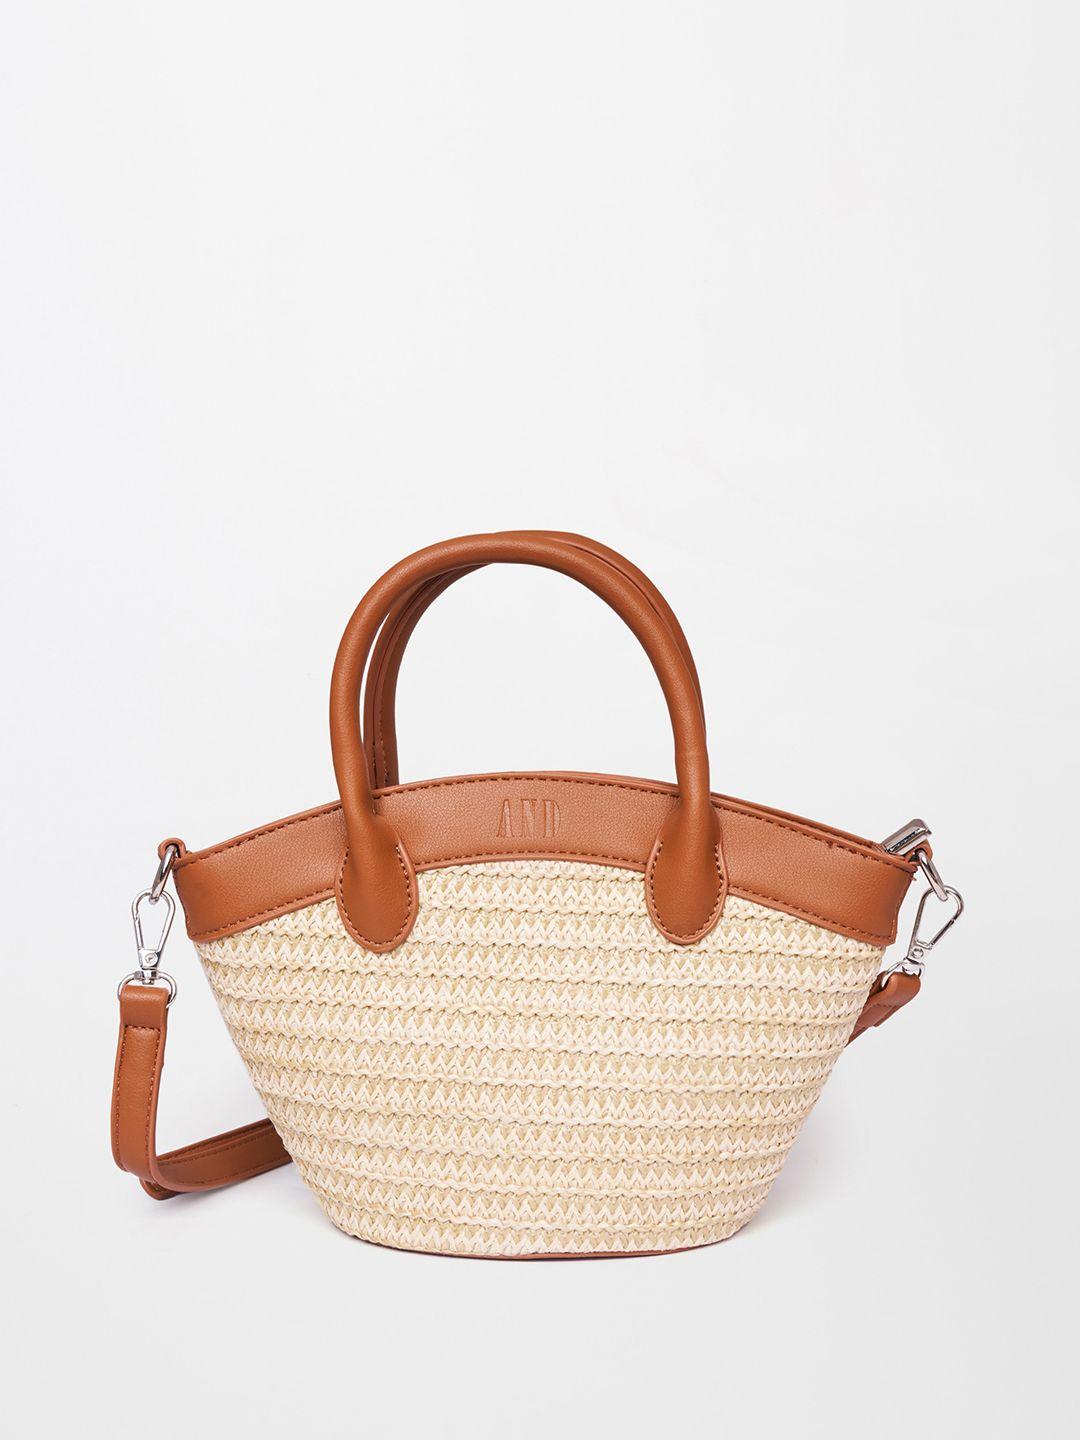 and-textured-structured-handheld-bag-with-tasselled